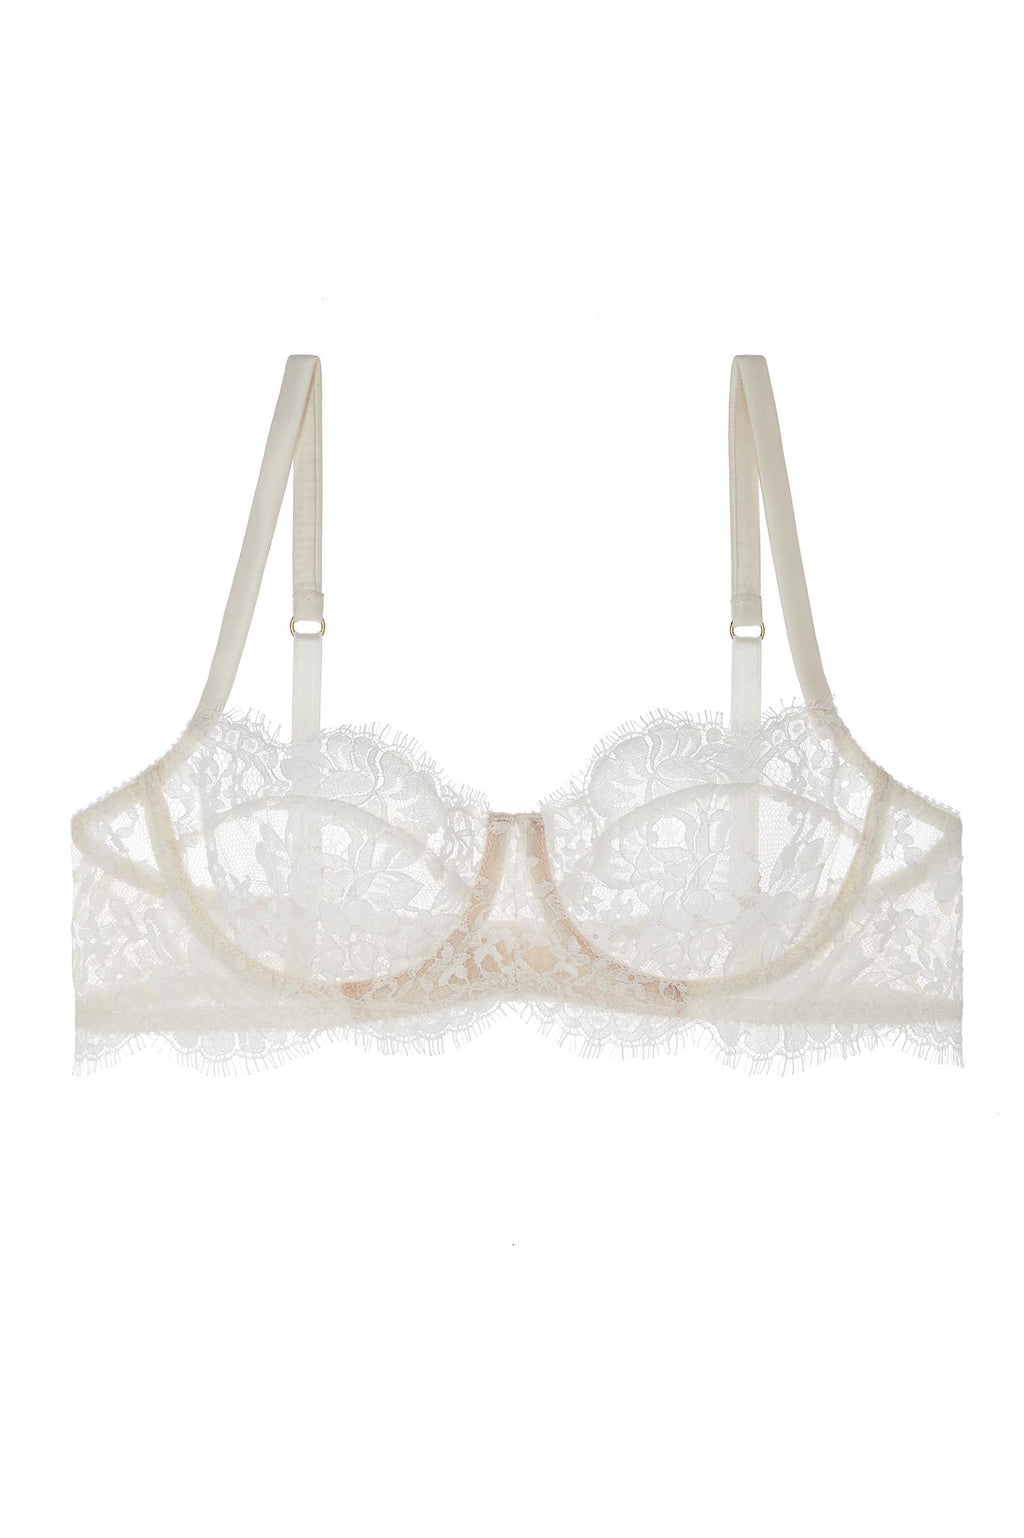 Wedding Day Bra Made With Silk Satin & Tulle the Esme Balcony Bra Has Demi  Cups in Sheer Floral French Leavers Lace Made to Order Ivory -  Canada